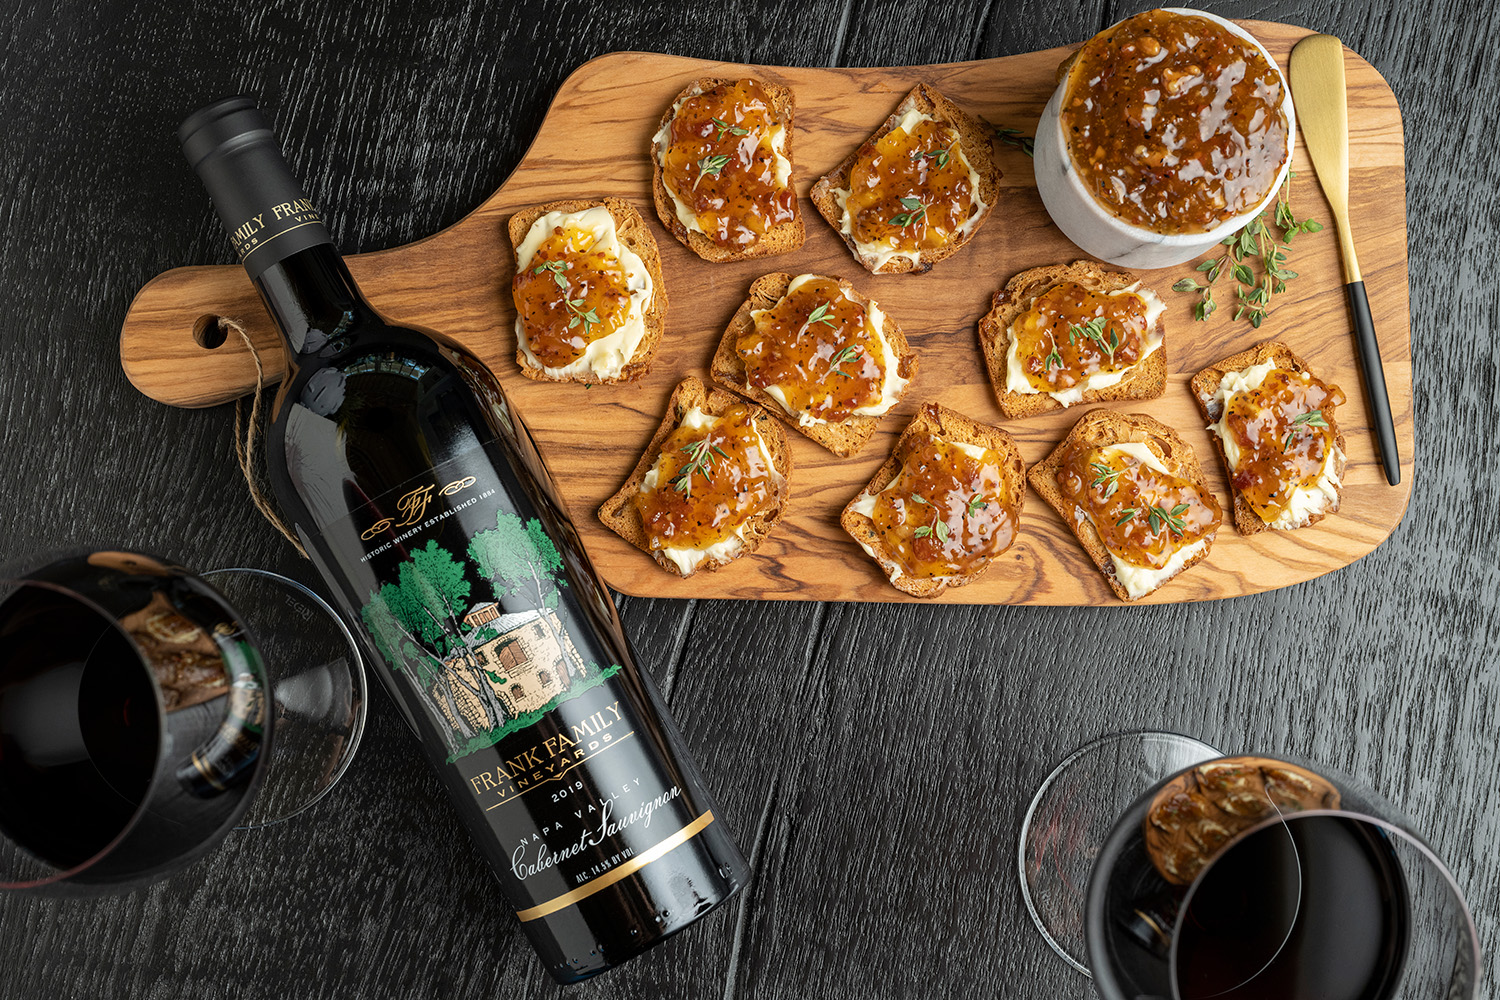 Crostini with bacon jam, a bottle of Frank Family's Napa Valley Cabernet Sauvignon, and a wine glass